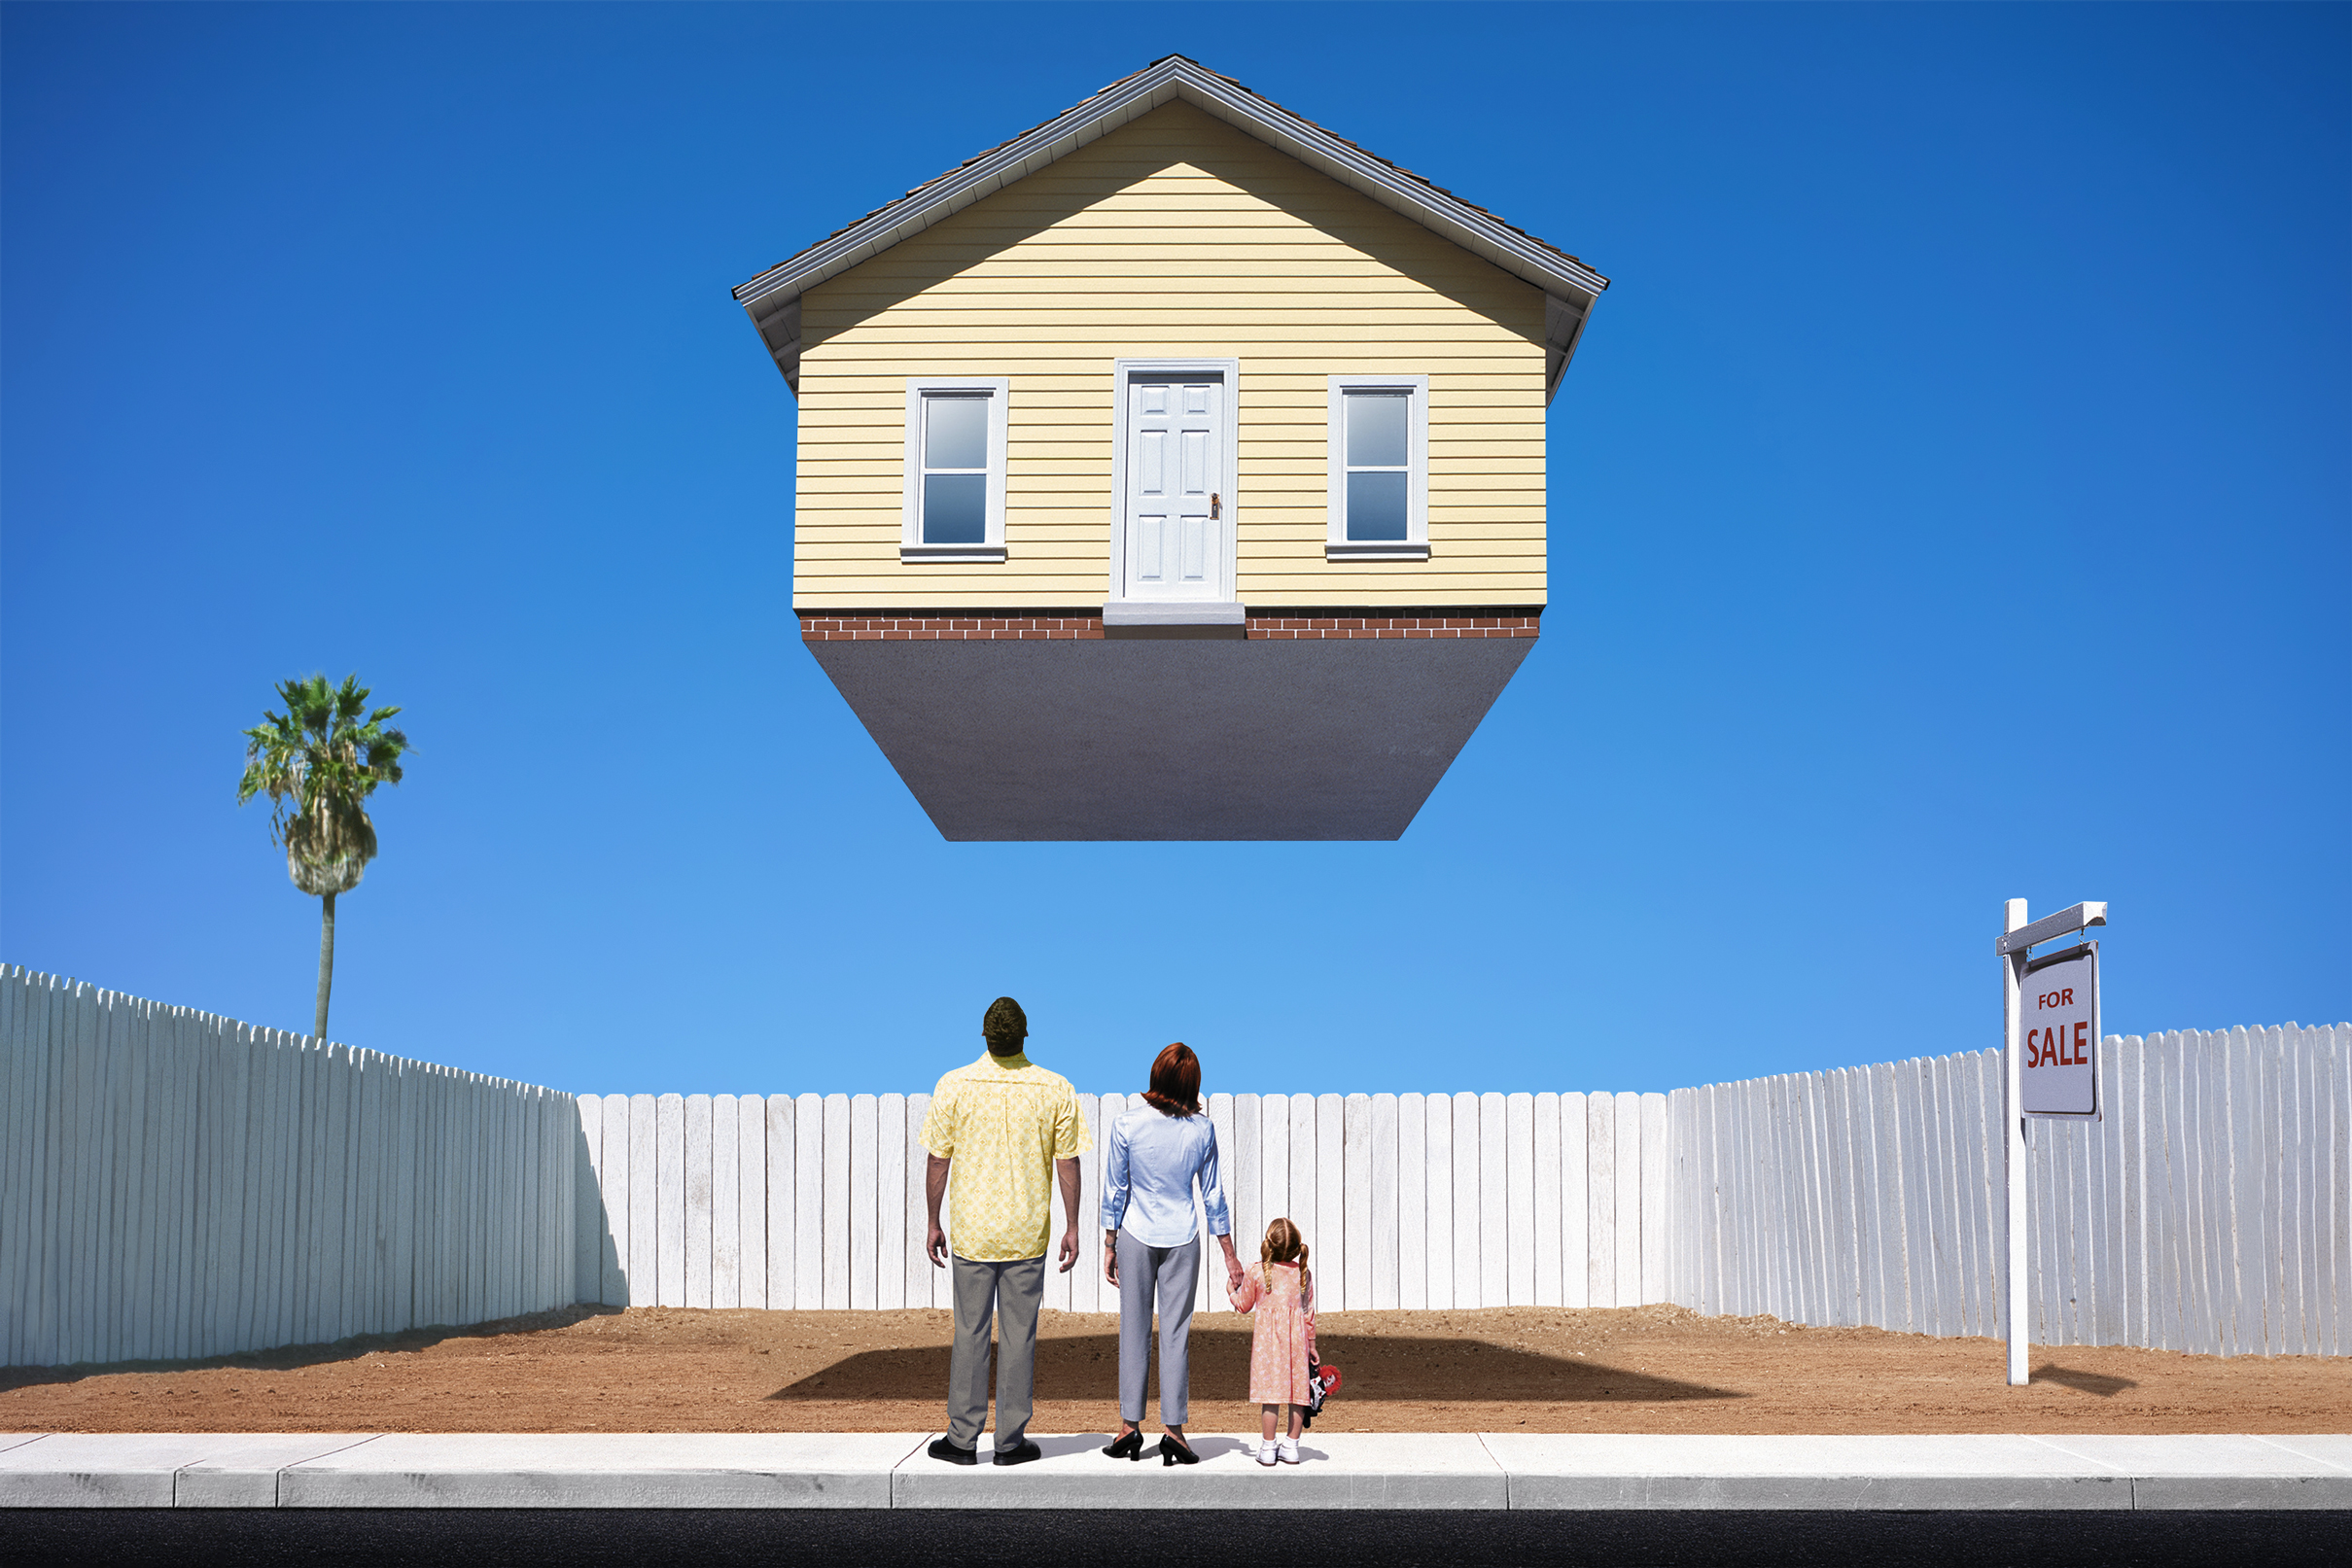 The Fed Says the Housing Market Needs a 'Correction.' What Does That Mean?